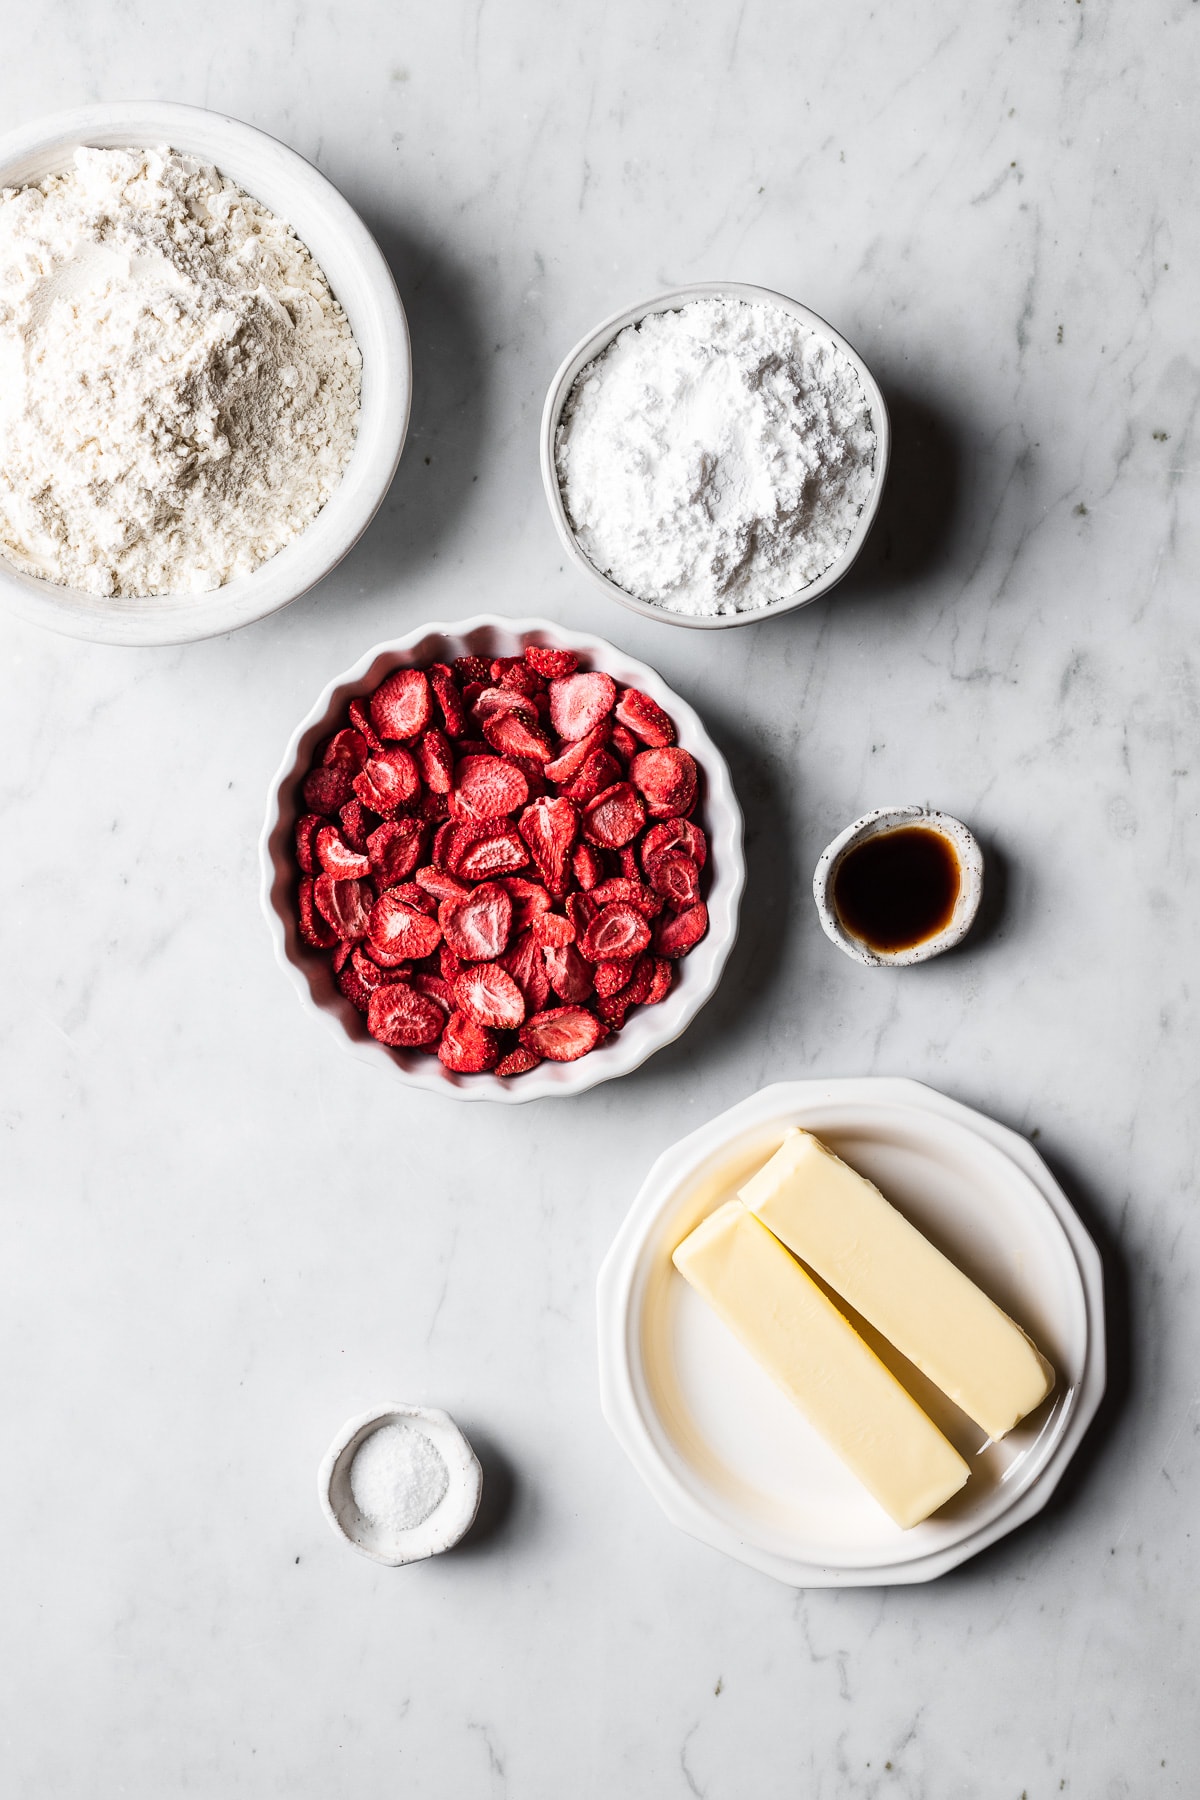 A photo of ingredients for strawberry shortbread cookies in white ceramic conainers on a light grey marble surface.